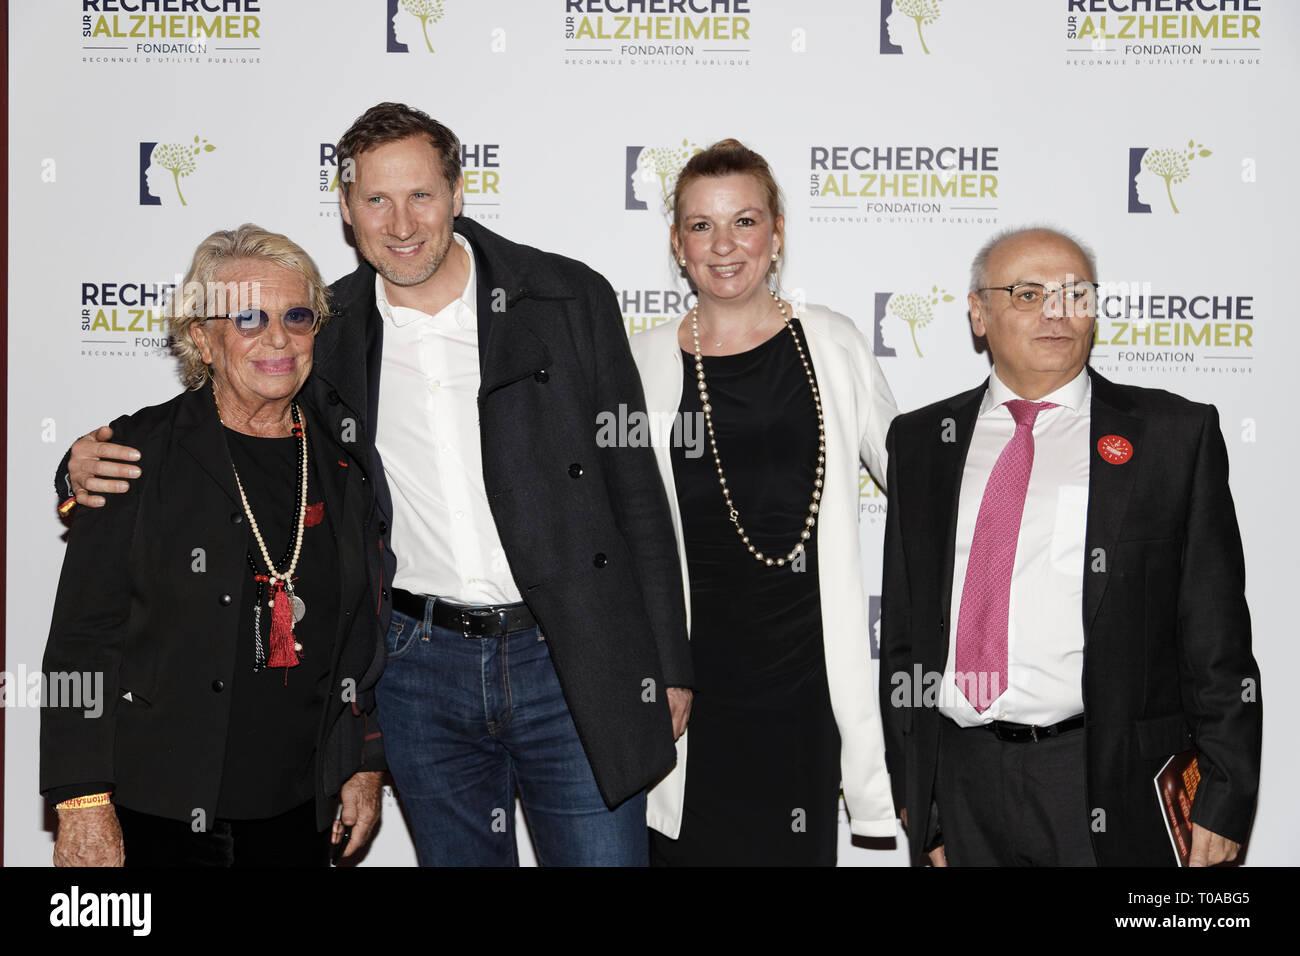 Paris, France. 18th Mar 2019. Veronique de Villele (L), Dany Mauro and personalities attend  - Photocall of the 14th Gala 2019 of the Association for Alzheimer Research at the Olympia in Paris on March 18, 2019, France Credit: Véronique PHITOUSSI/Alamy Live News Stock Photo